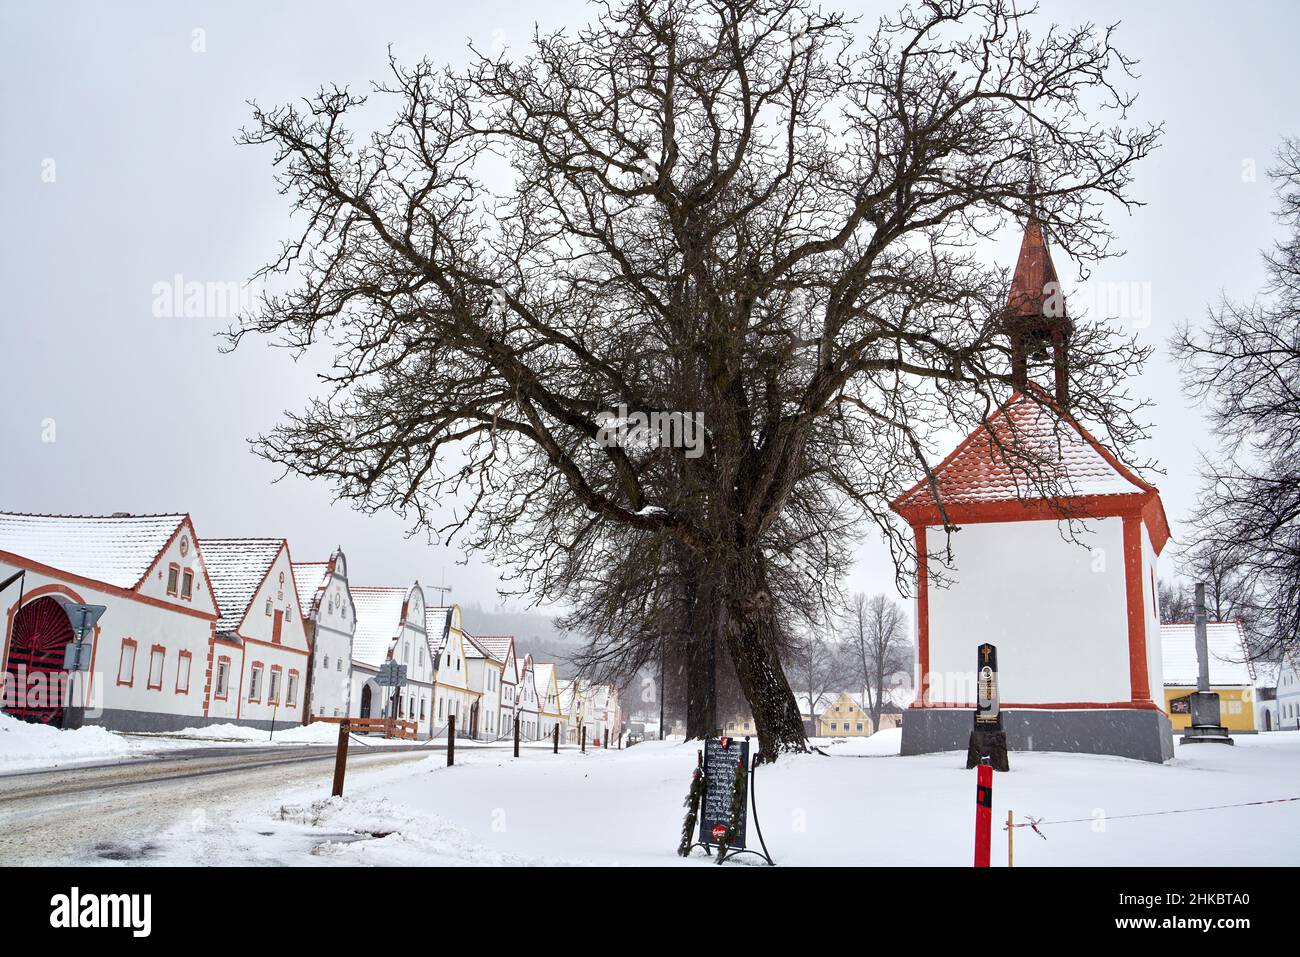 HOLASOVICE, CZECH REPUBLIC - JANUARY 21, 2022: Village with houses in rural baroque style registered as UNESCO world heritage site Stock Photo